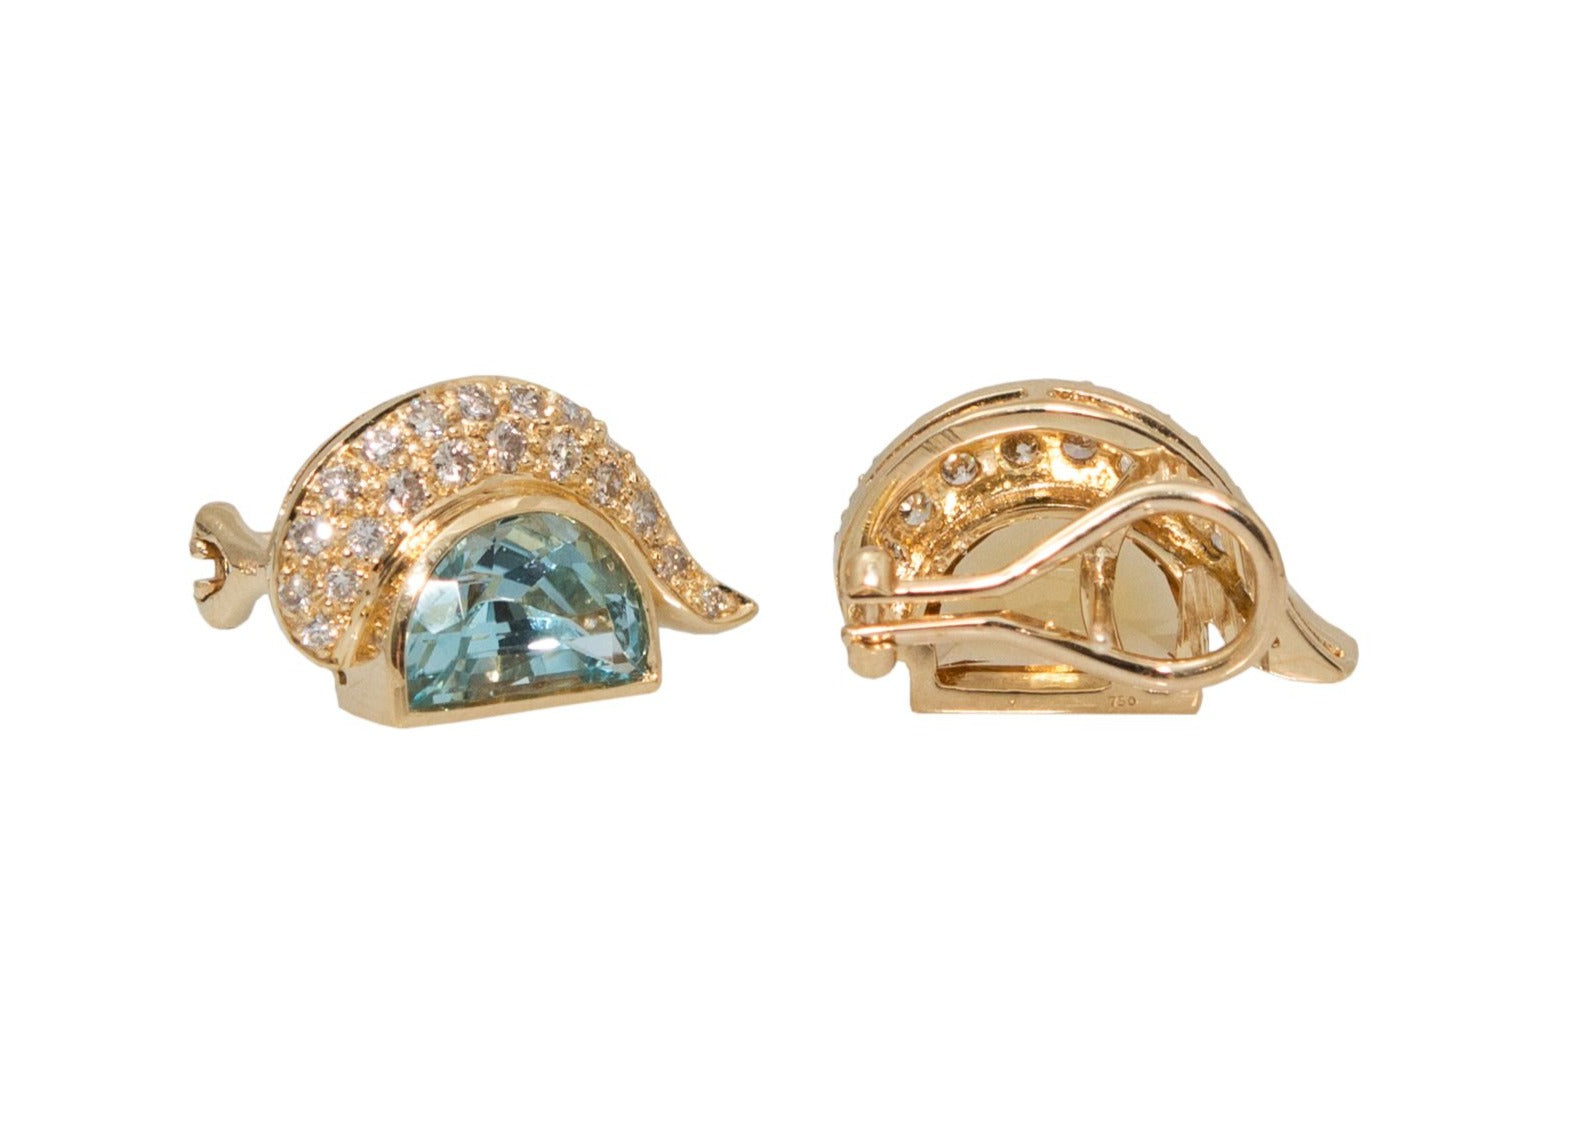 Crafted of dazzling 18k Yellow gold, this pair of earrings features 0.85 cts of diamonds, a half-moon shaped blue topaz, and a half-moon shaped citrine, all set in a 3/4" long, 1/2" wide mounting. Secured with an Omega clasp, these earrings are made in Italy.